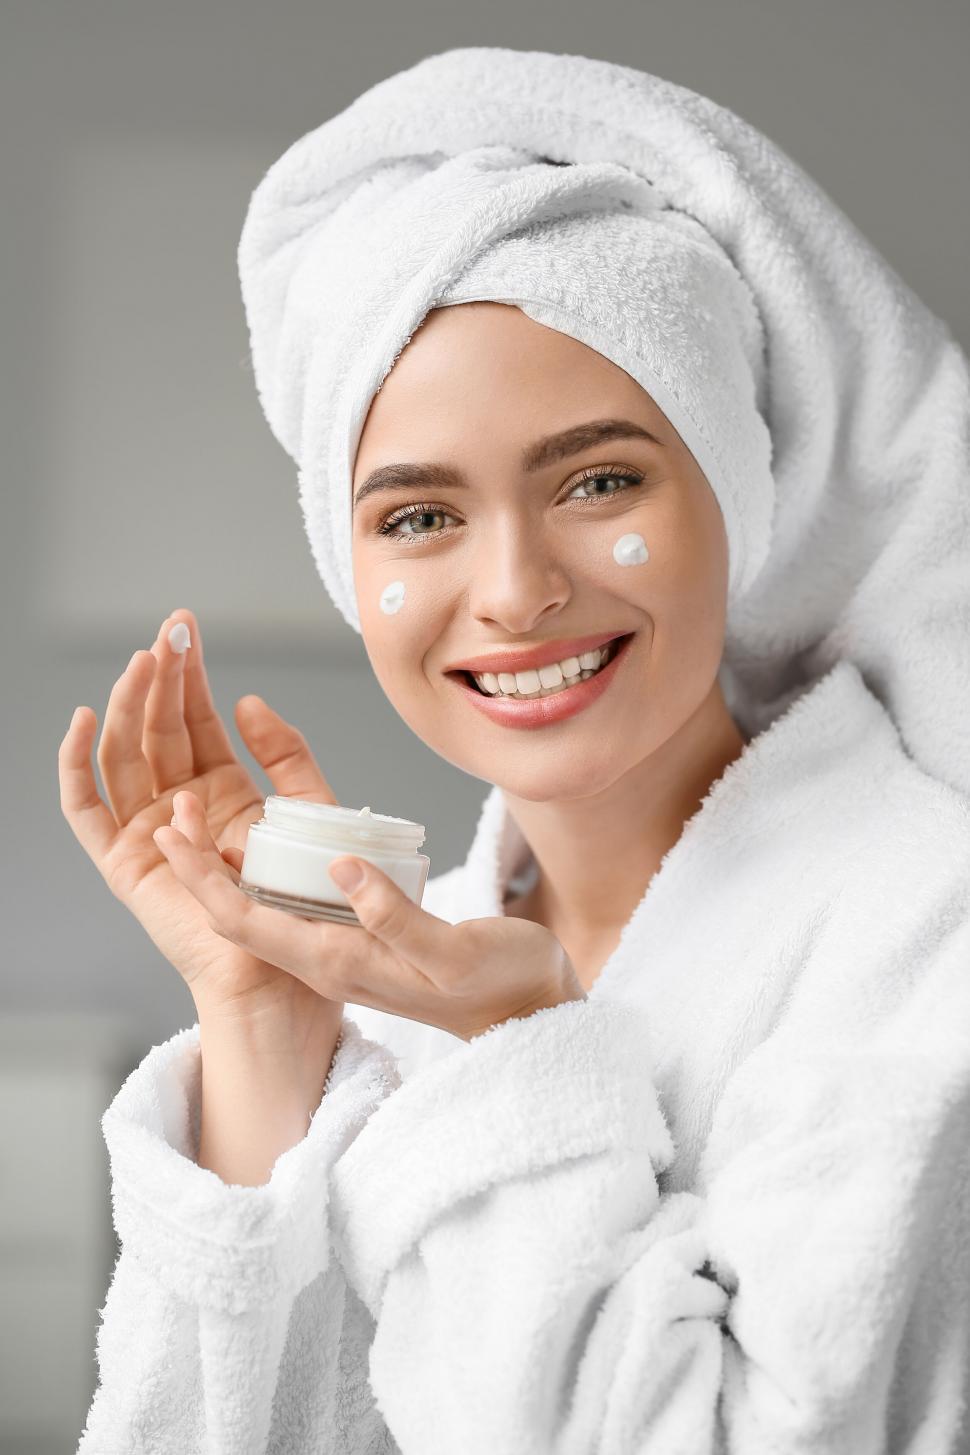 Free Image of A woman wearing a white robe and a towel on her head holding a jar of cream 